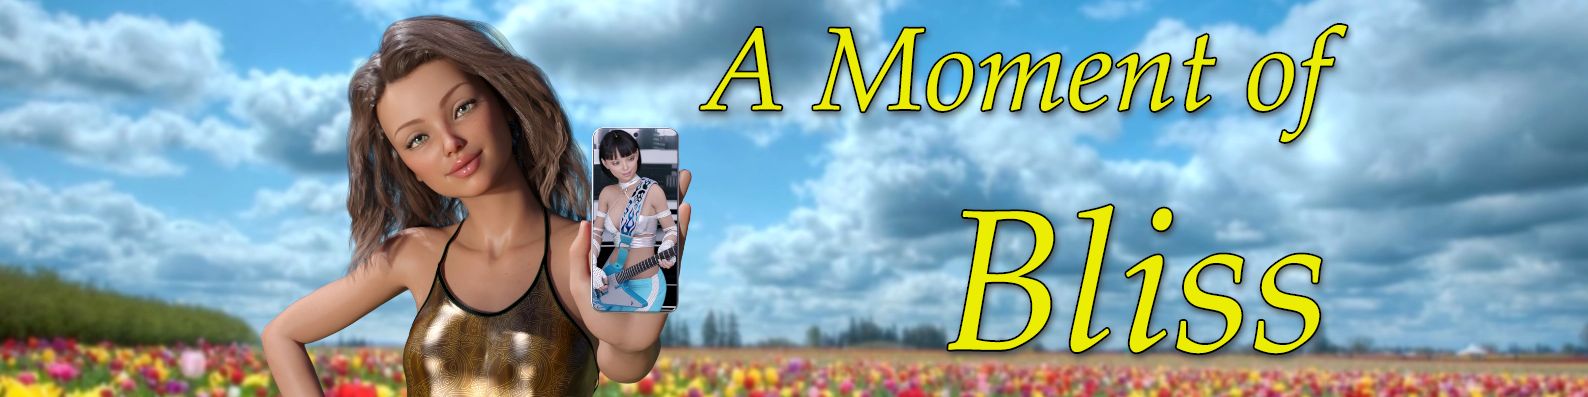 A Moment of Bliss [Lockheart] Adult xxx Game Download